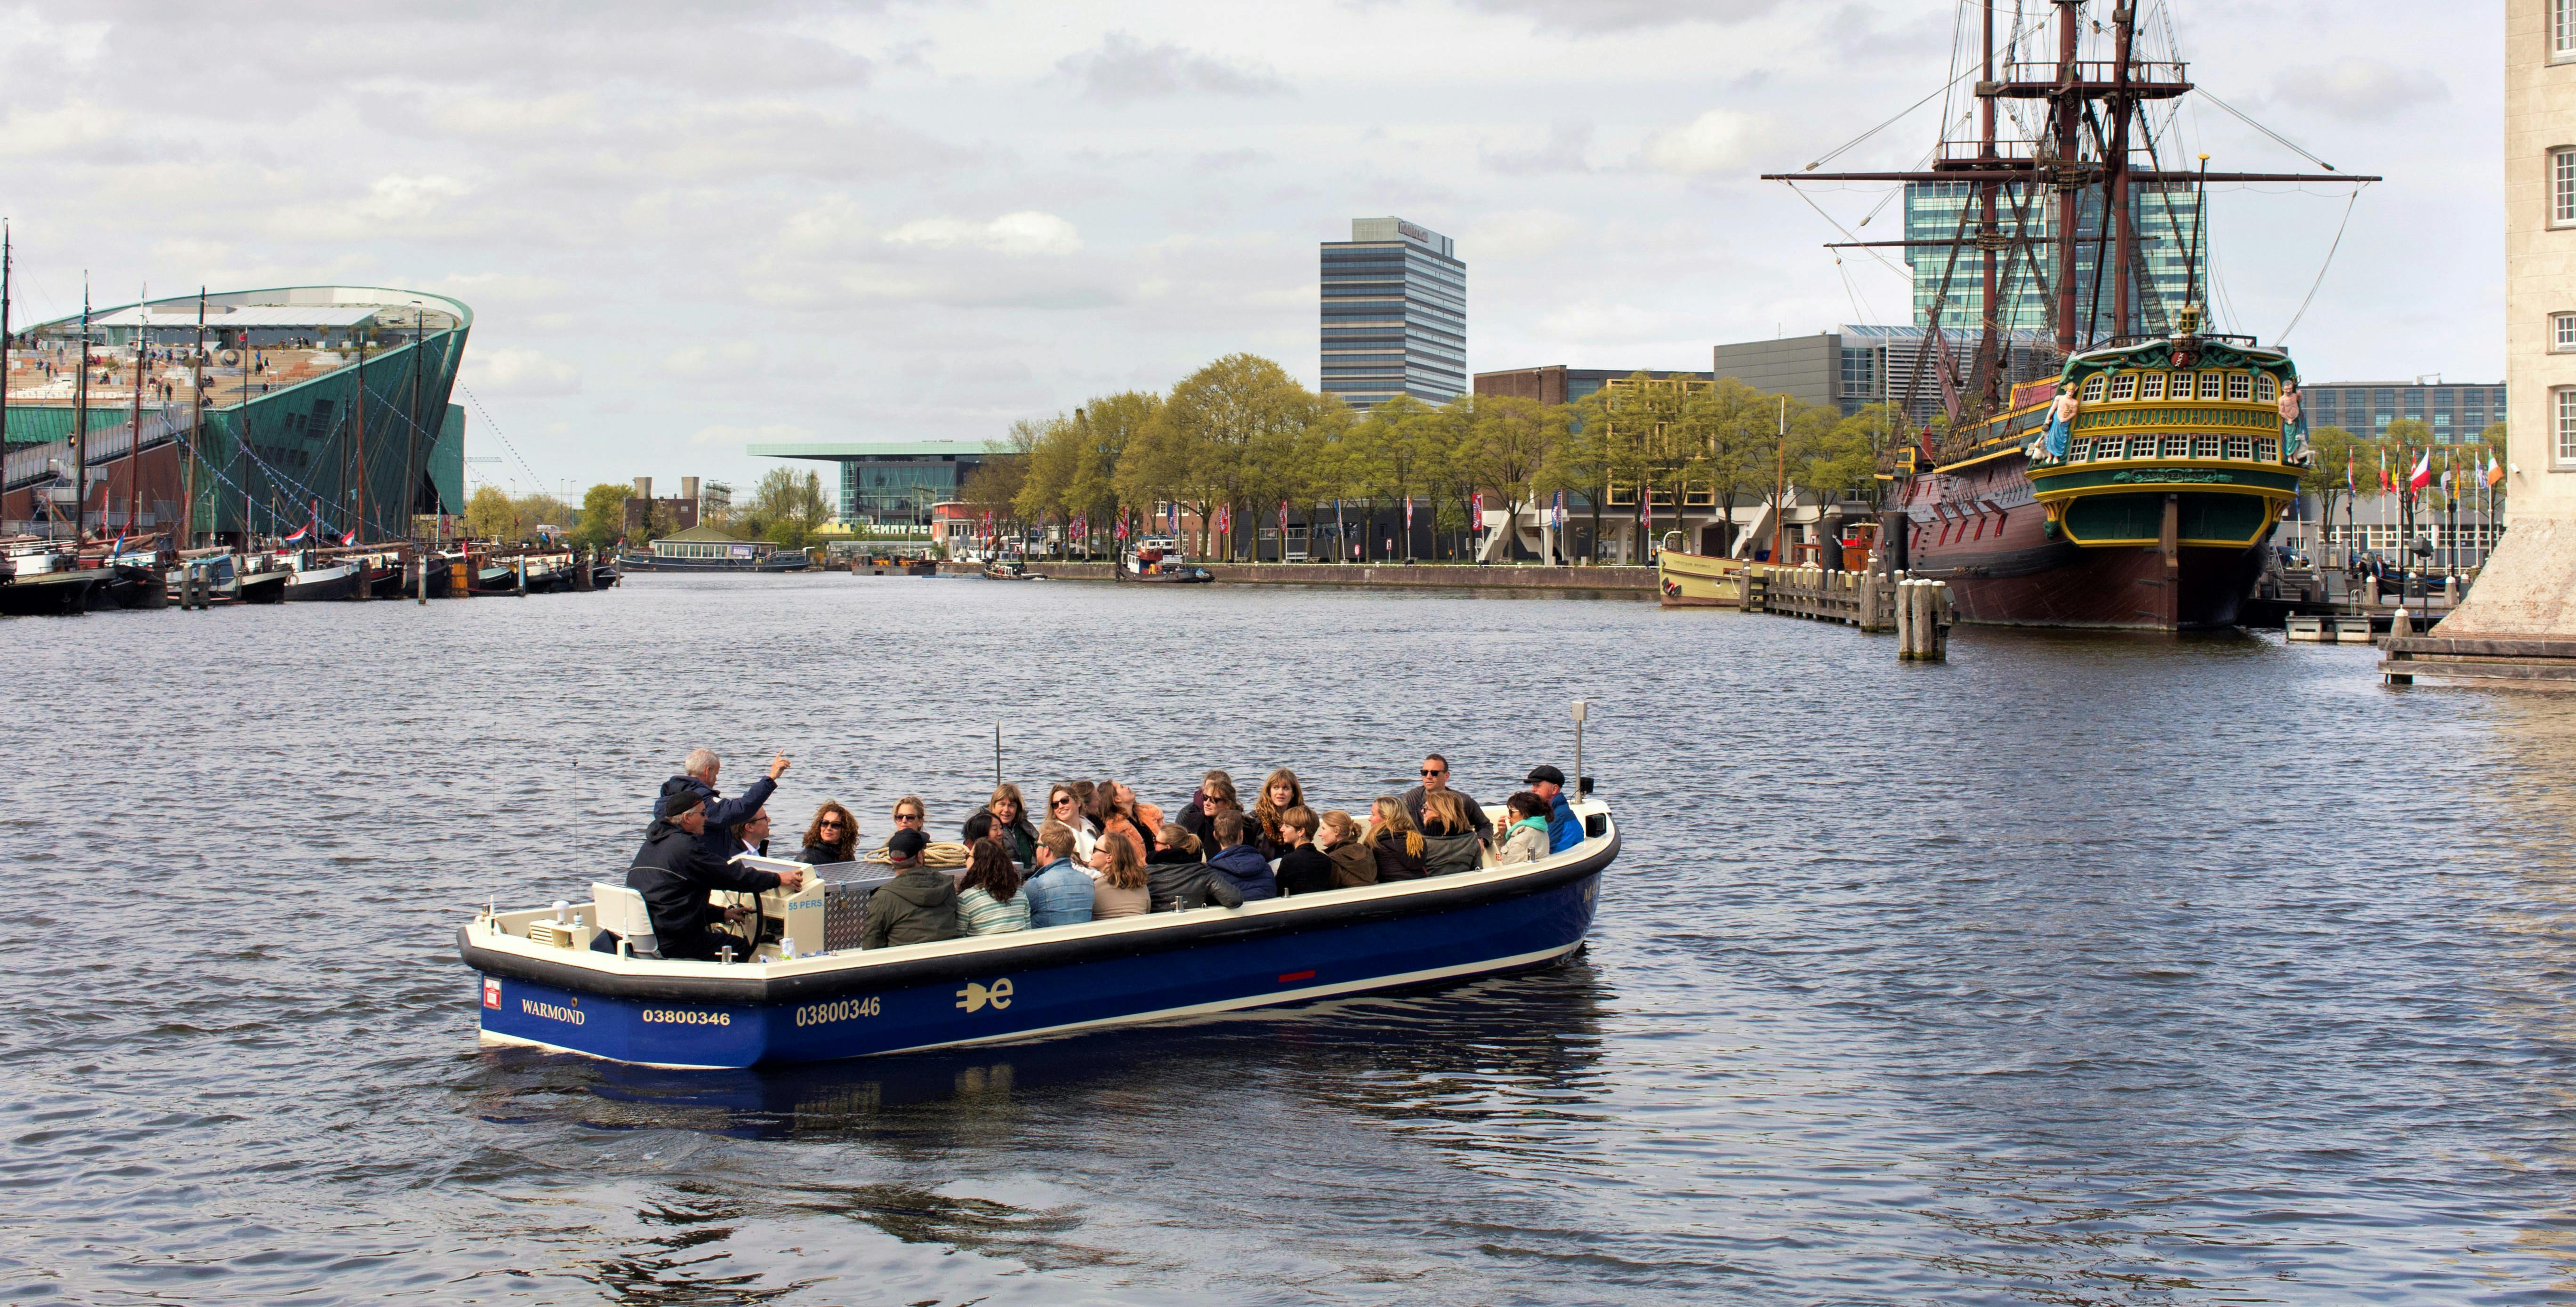 Amsterdam open boat canal cruise